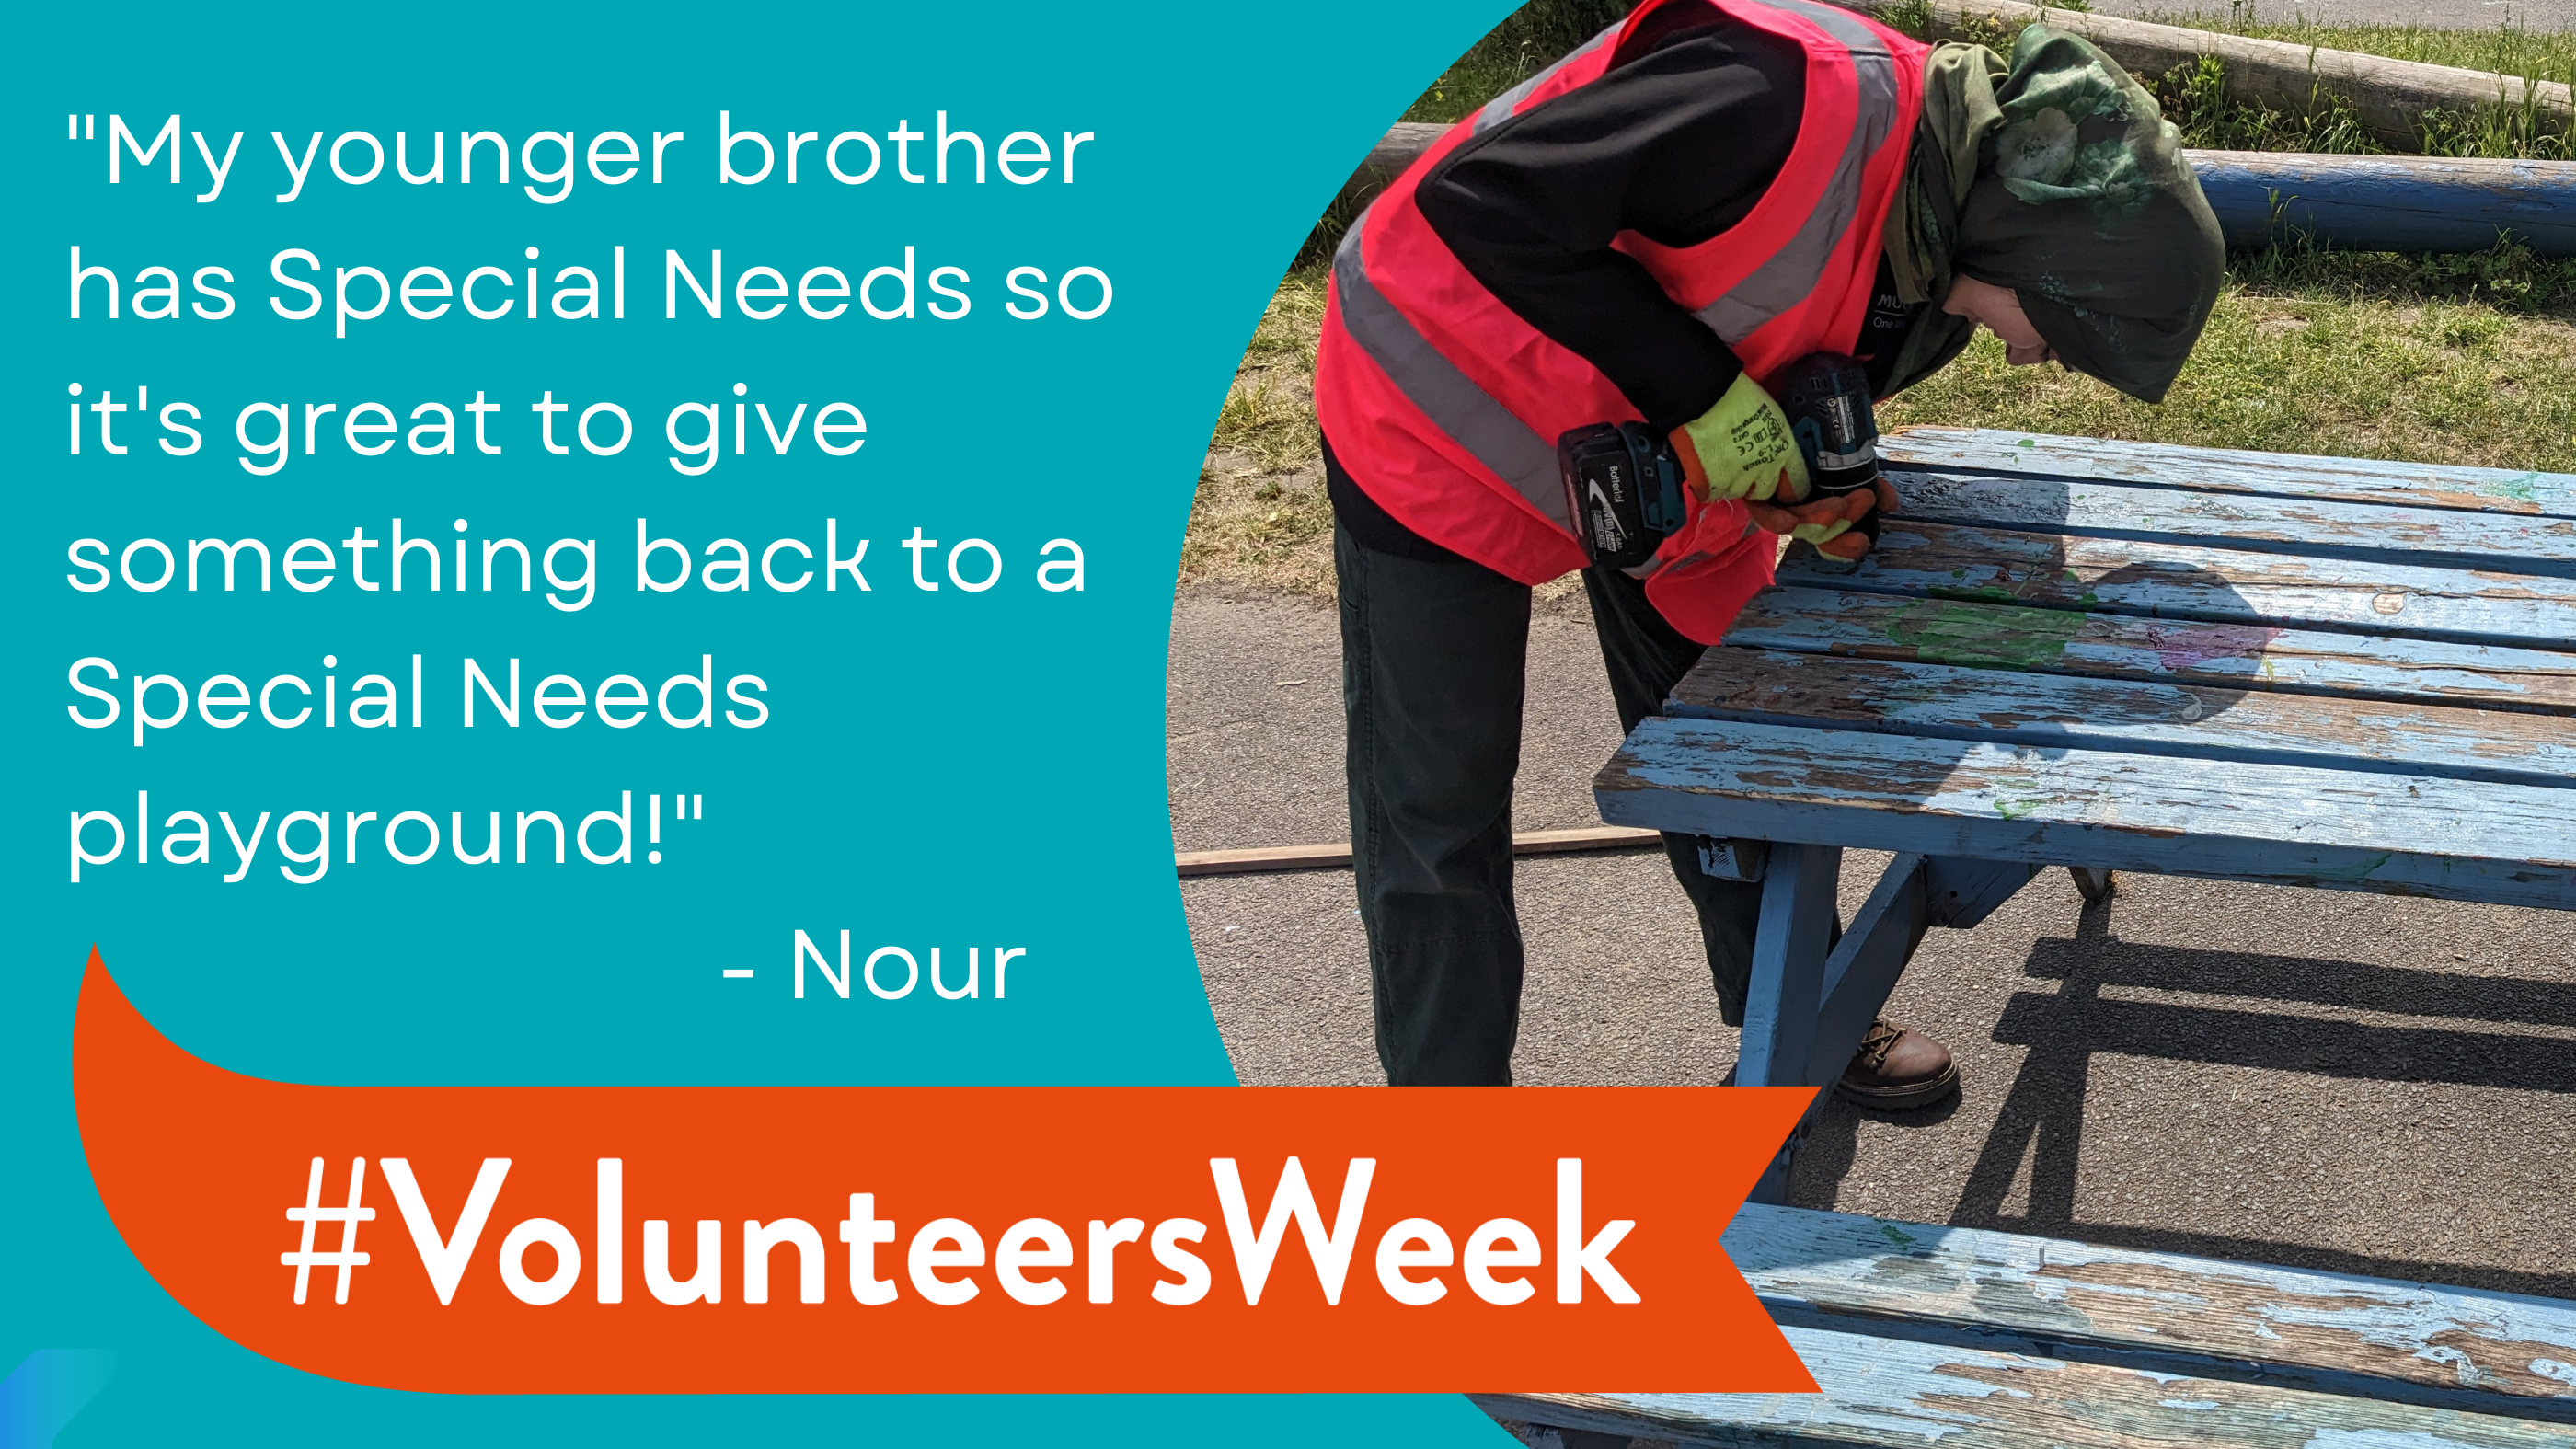 Nour, a woman drilling a bench, says "my younger brother has special needs to it's great to give something back to a special needs playground"